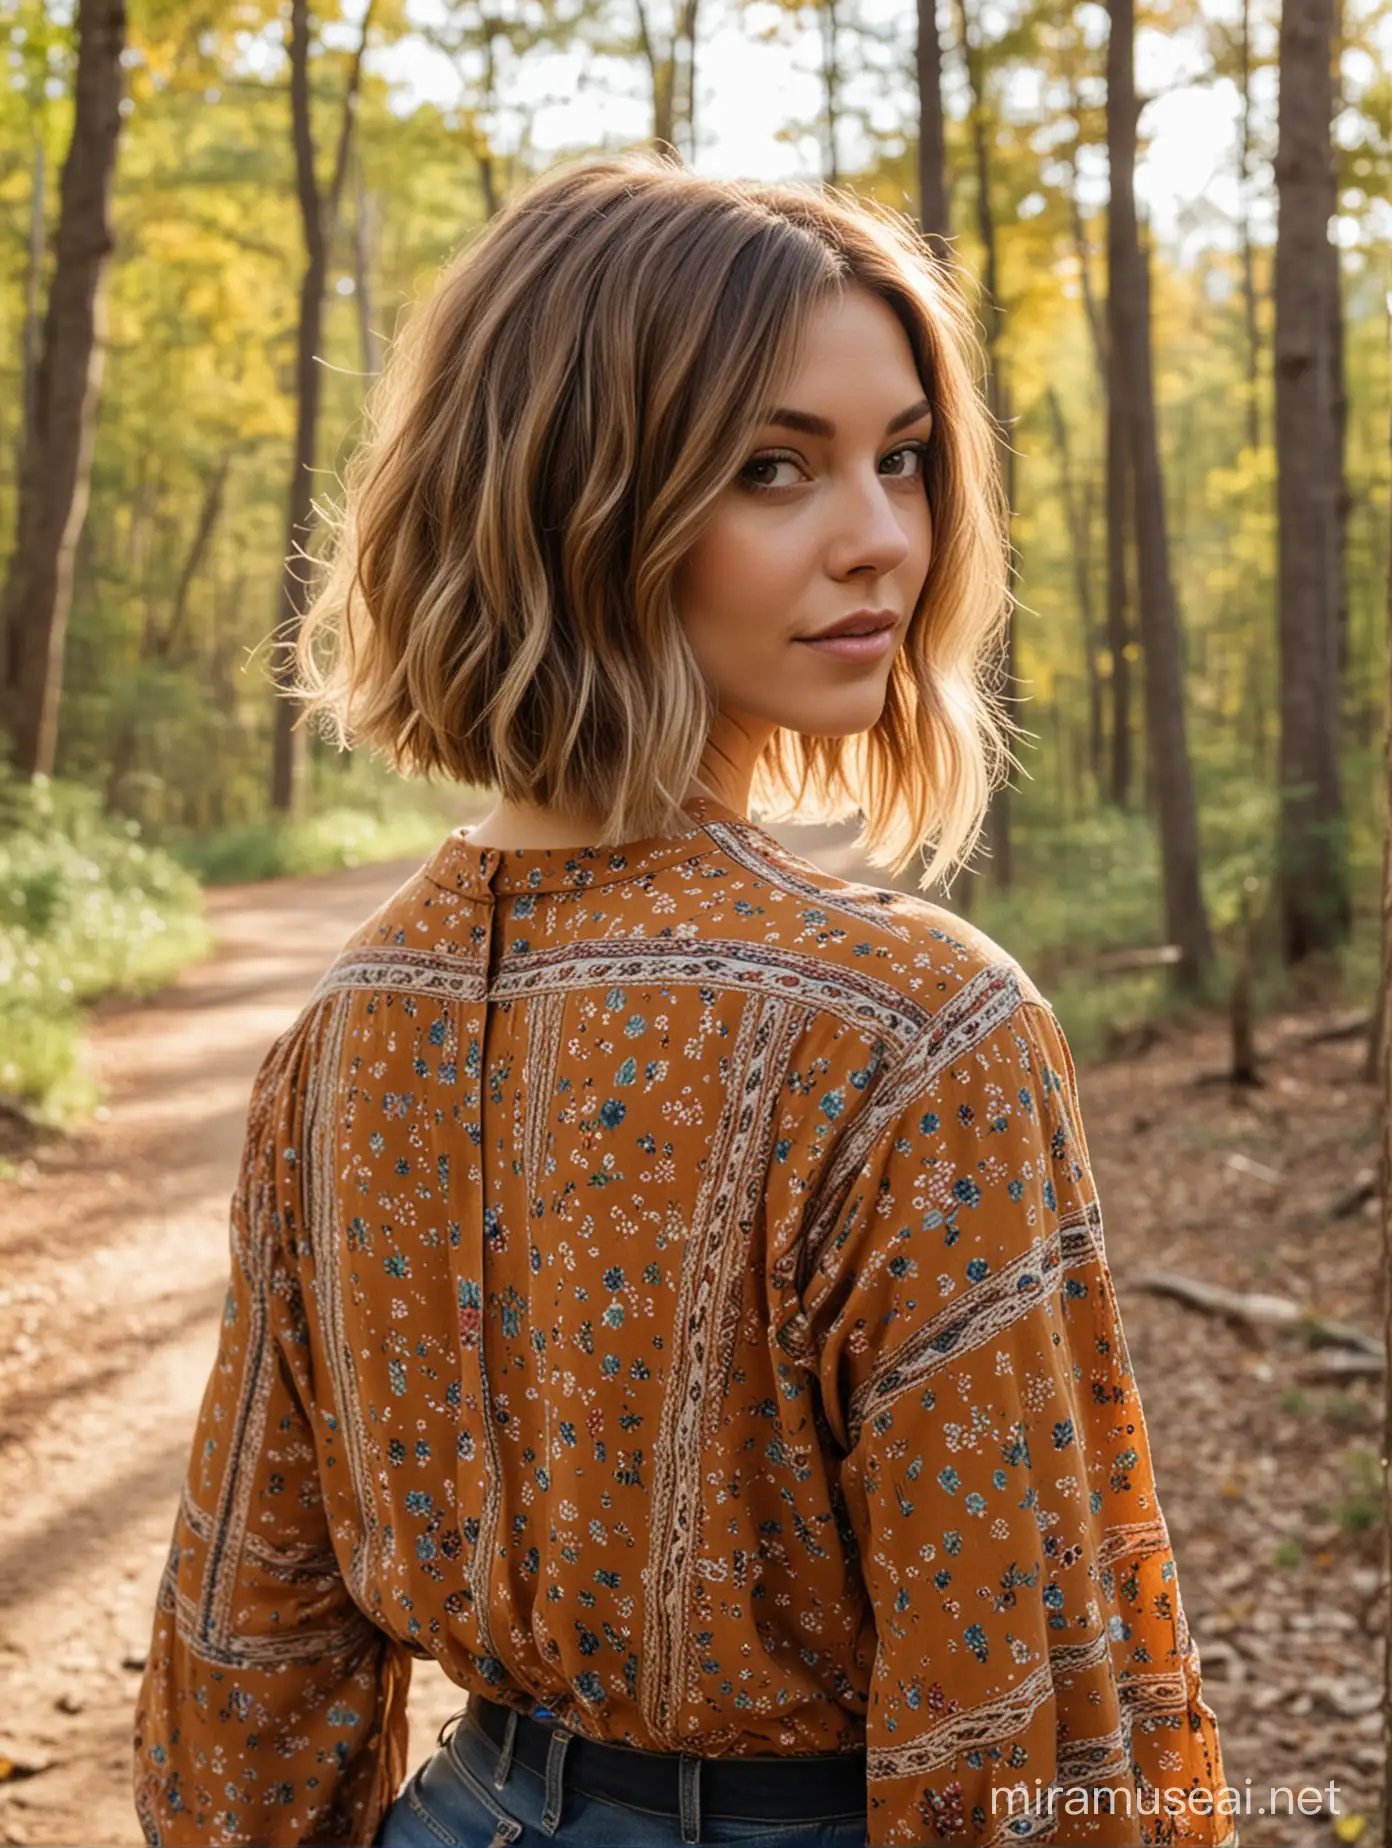 Colorful Quirky Bohemian Woman in Country Woods